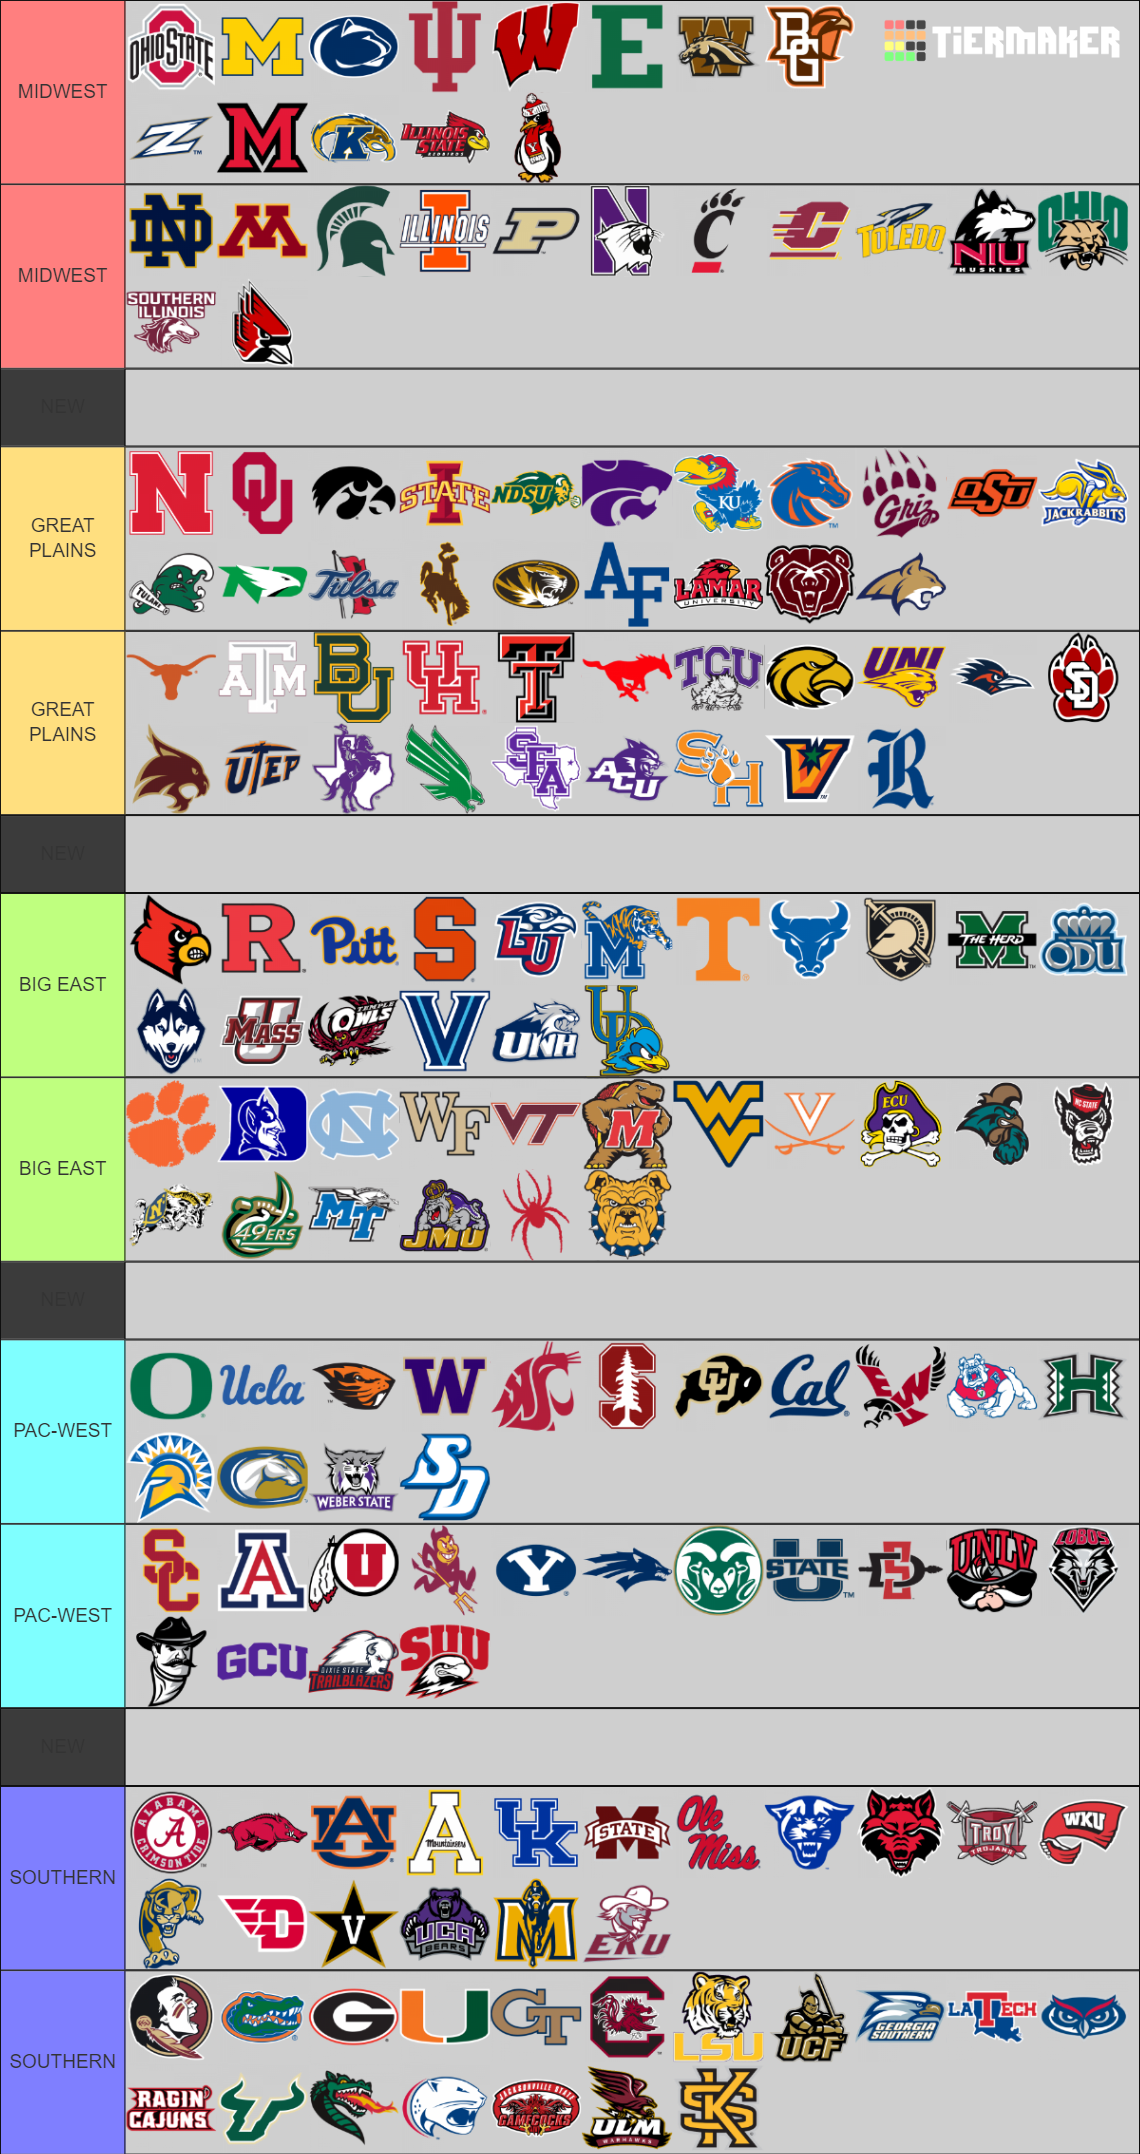 (2025) FBS Conference Realignment w/WAC and some FCS Tier List